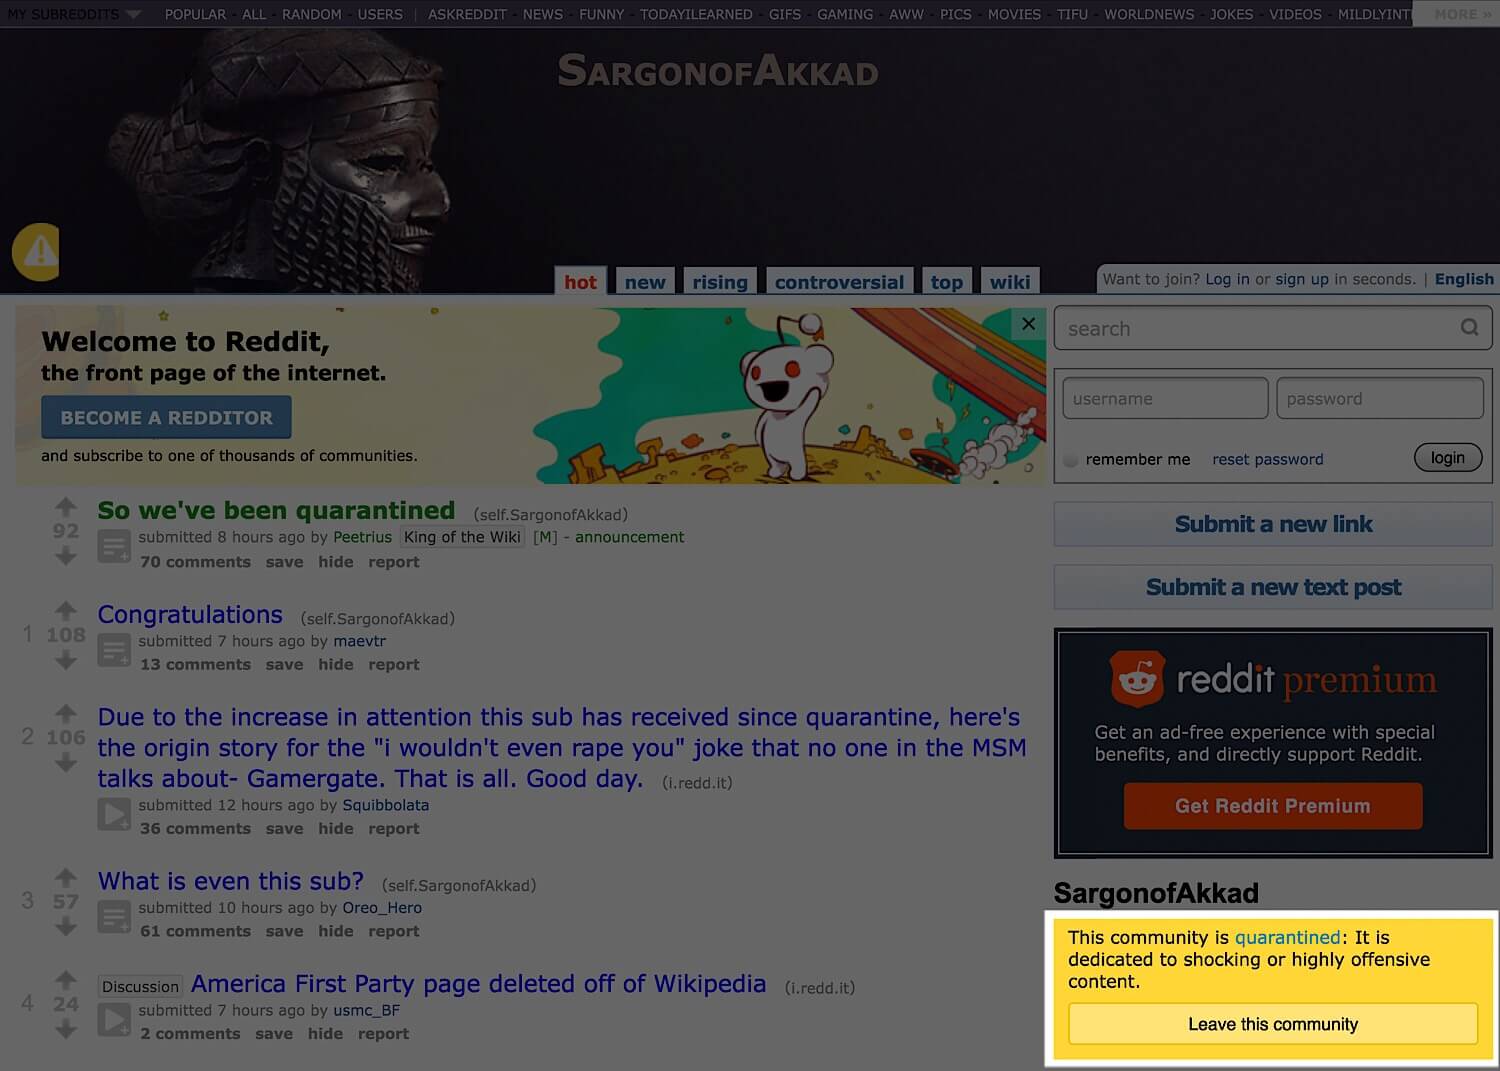 The Reddit quarantined warning message that appears in the sidebar of the r/SargonofAkkad subreddit.